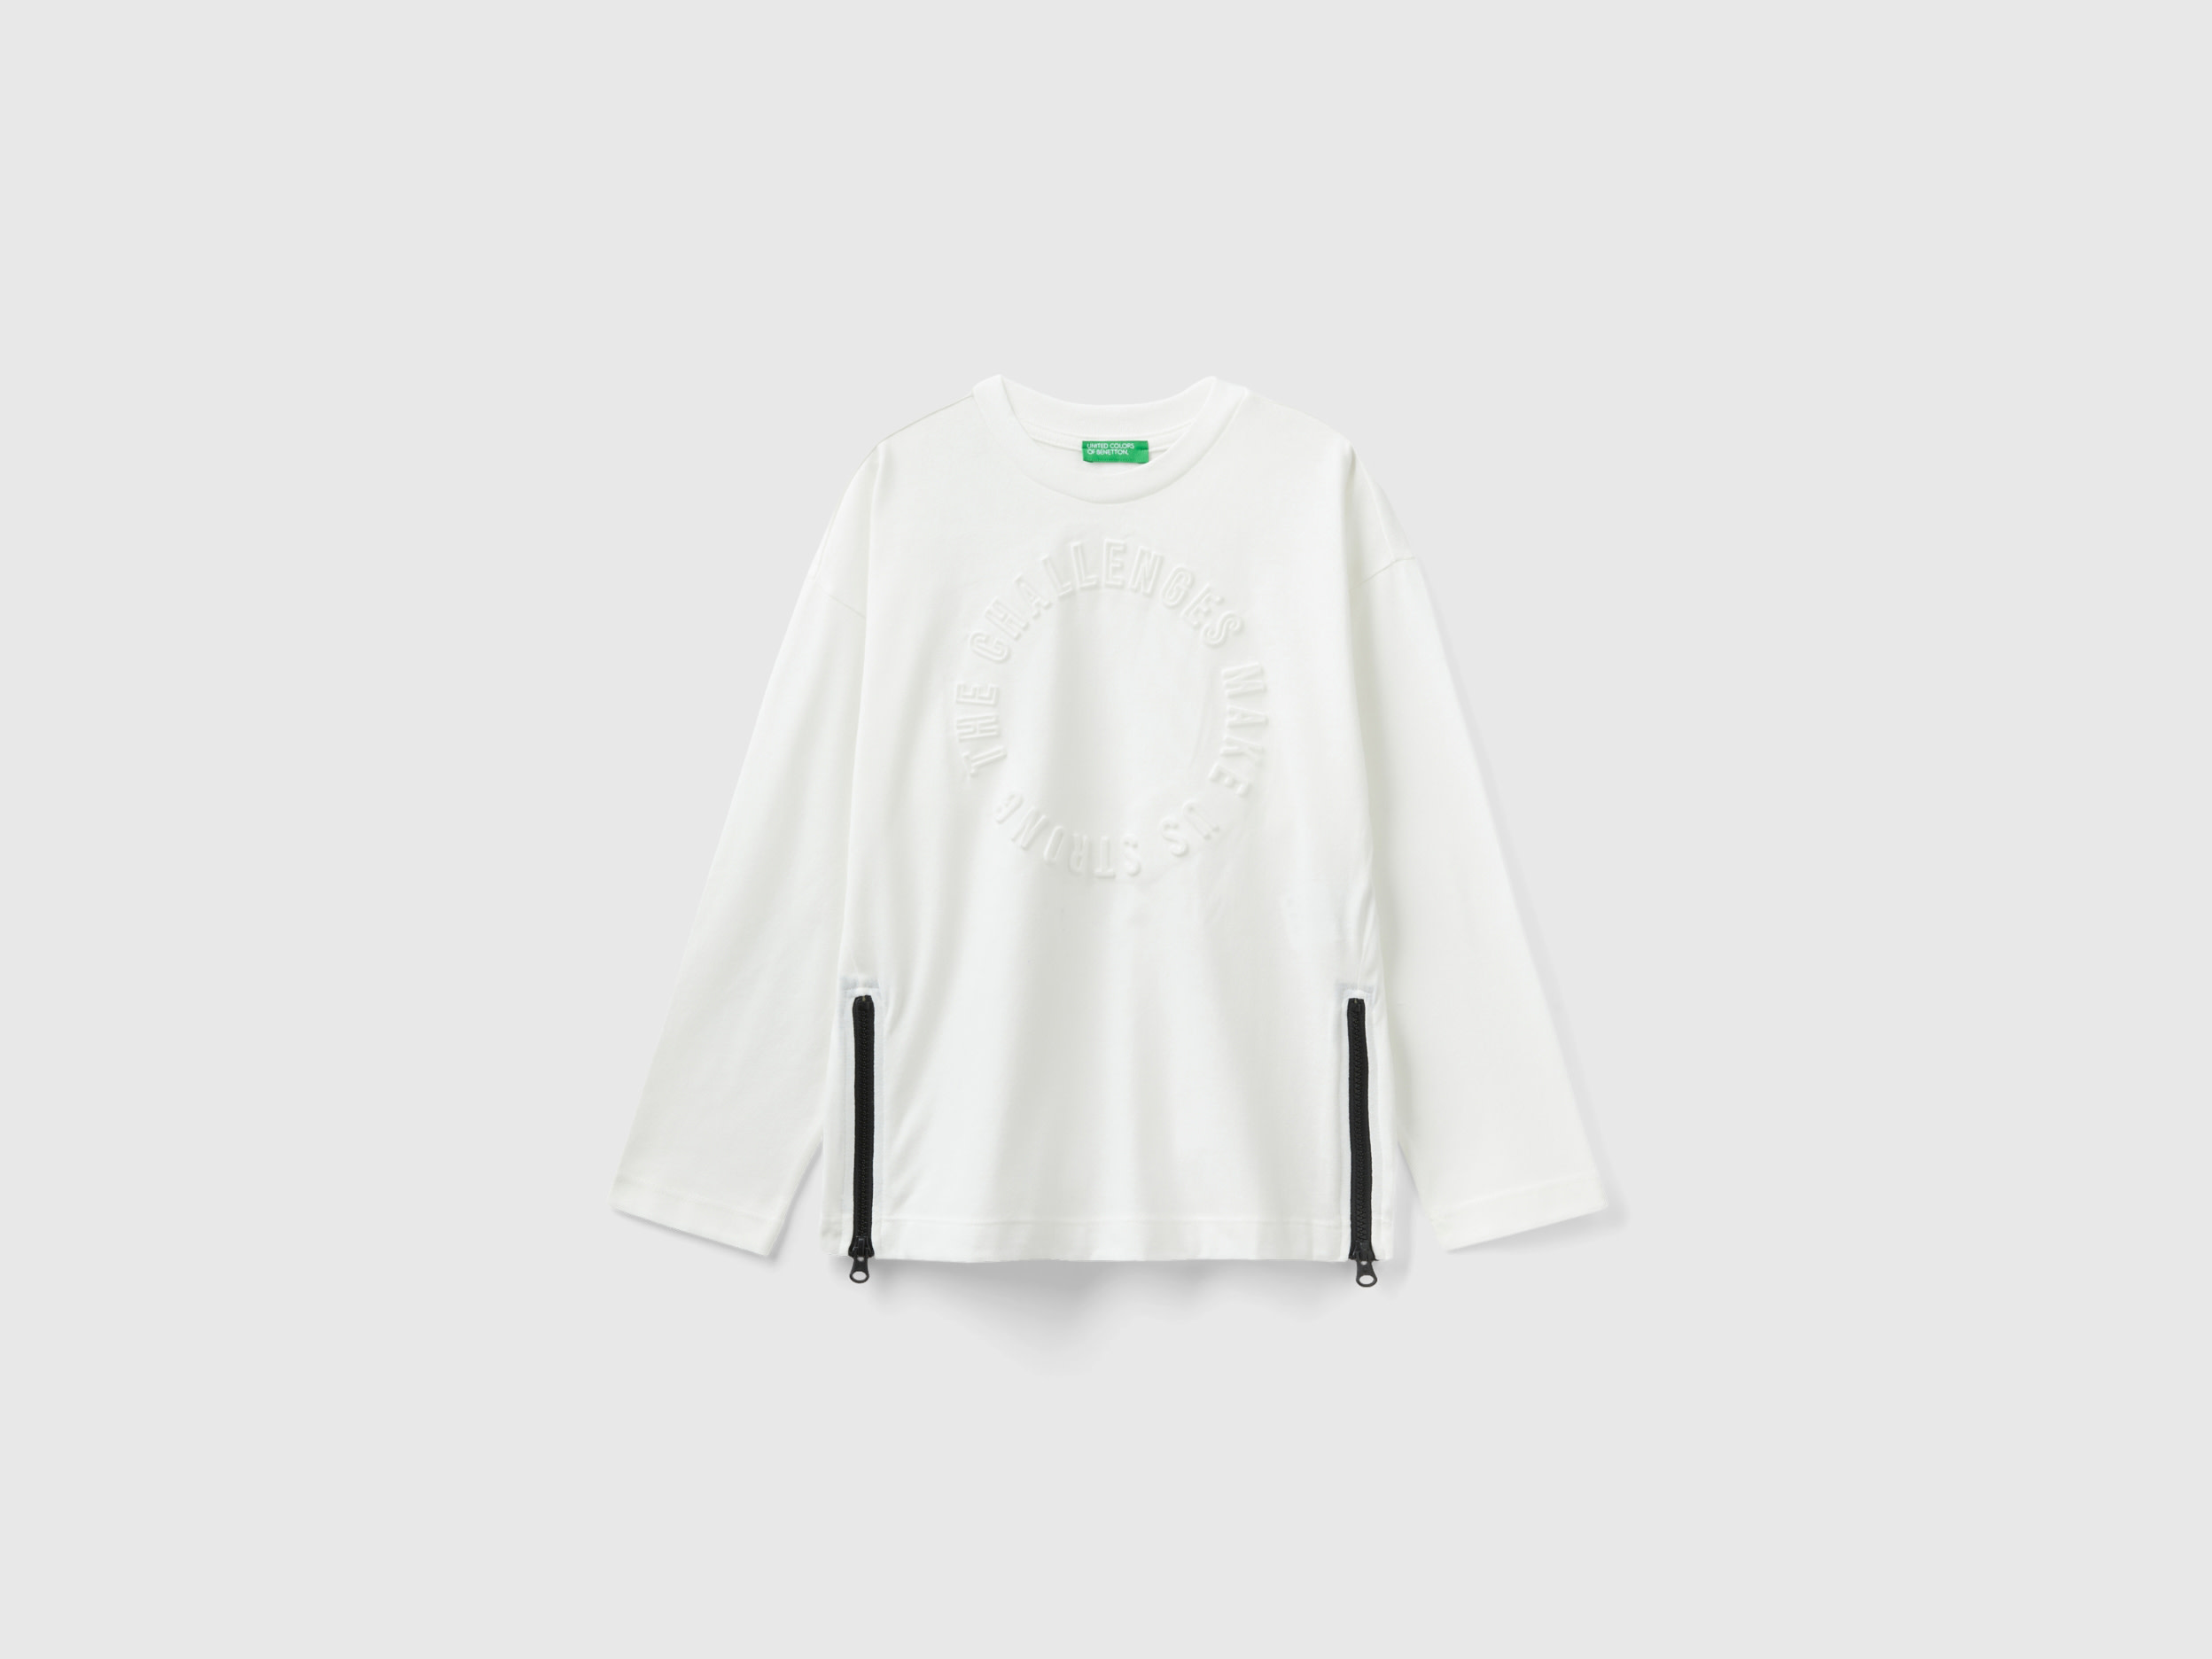 Benetton, Oversized Fit Sweatshirt With Embossed Print, size S, White, Kids